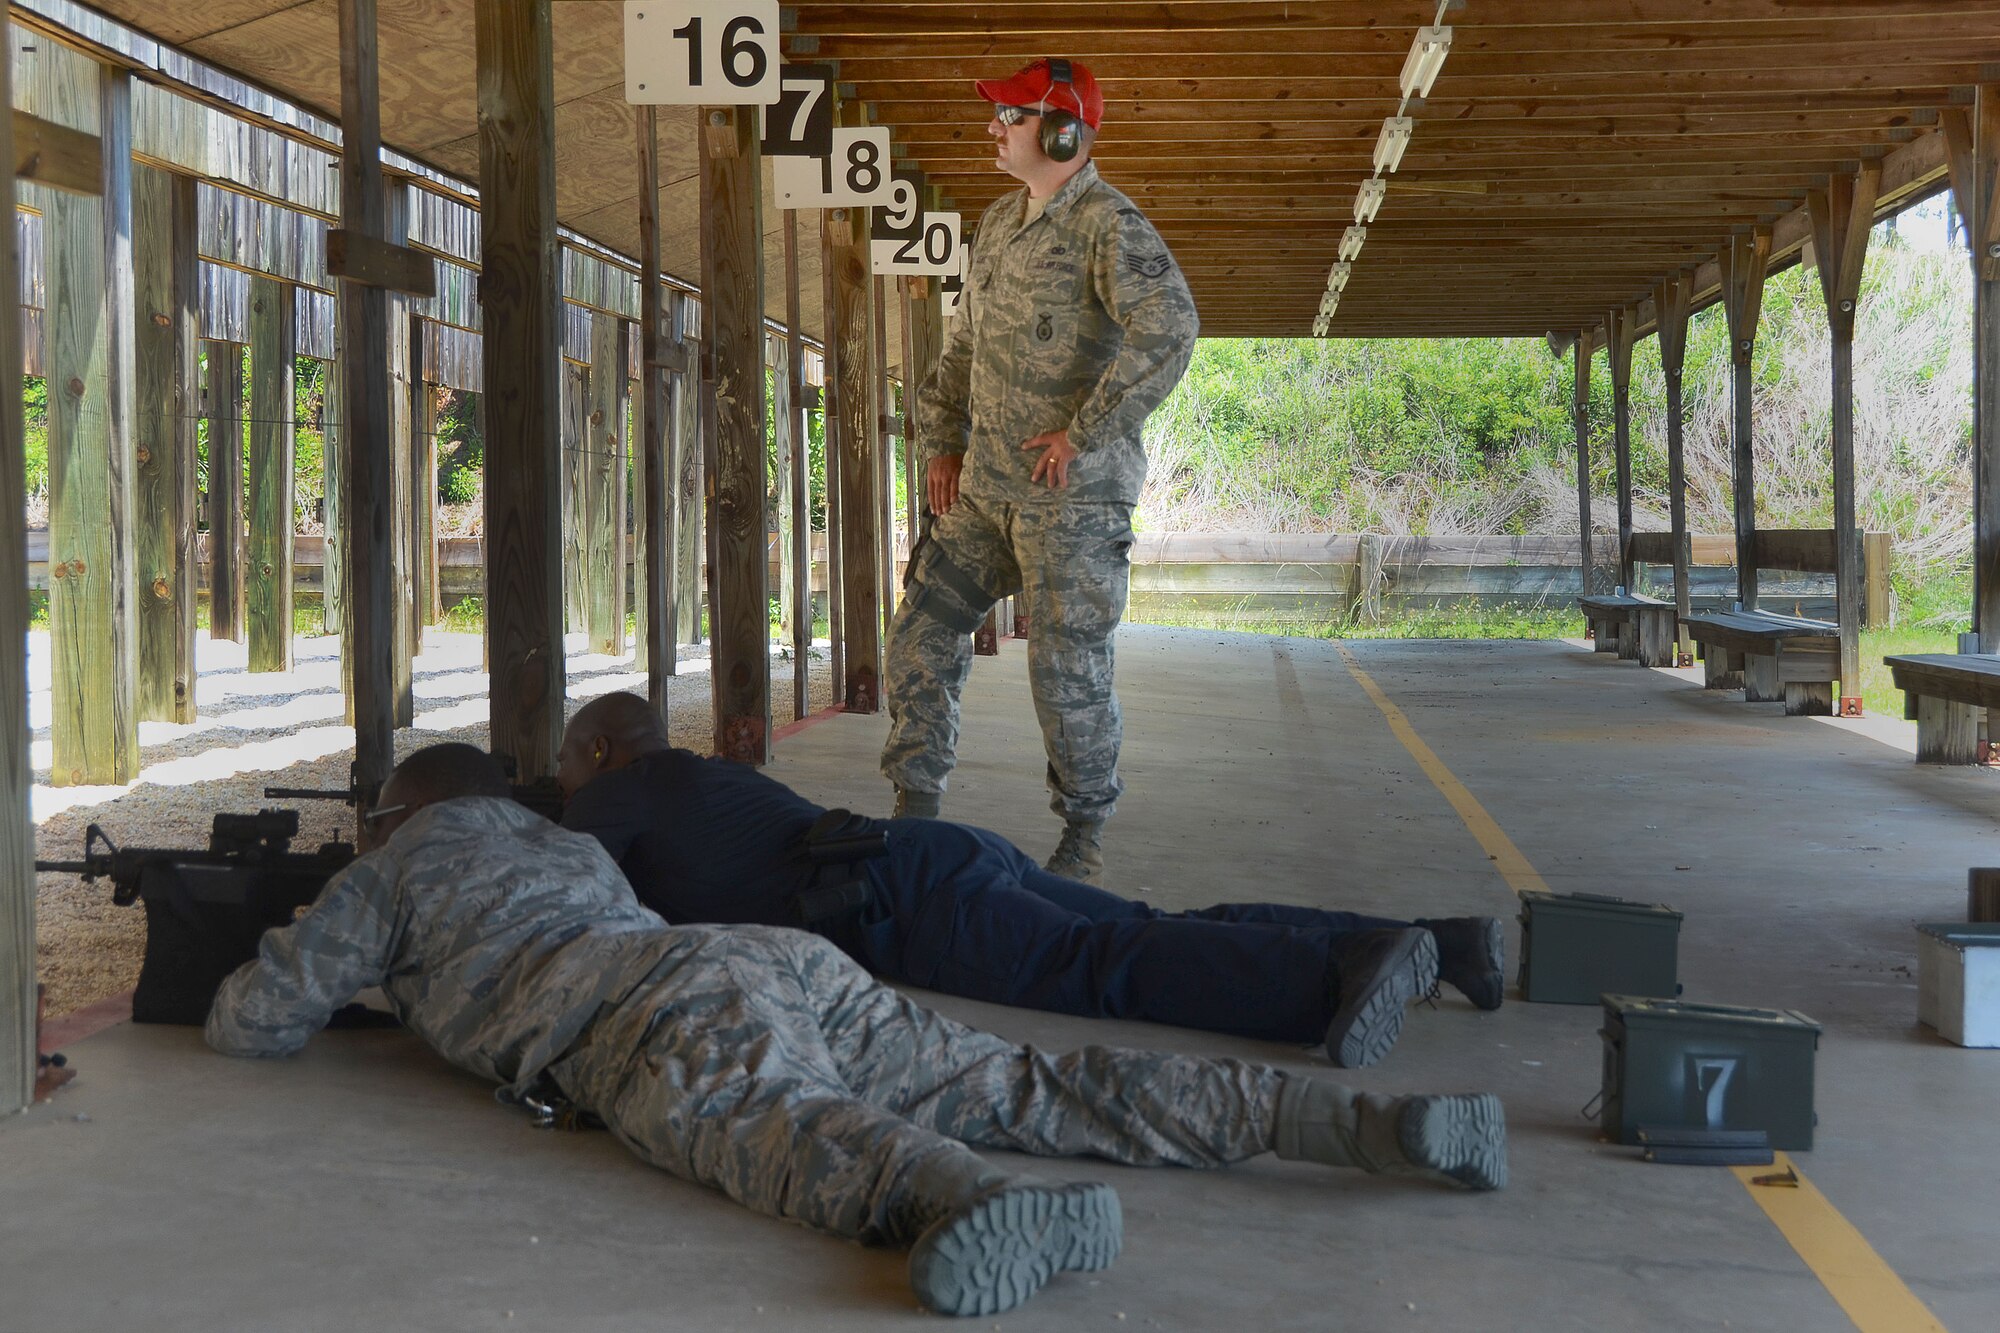 Senior Airman Marcus Heyward, retired U.S. Army MSgt Edward Earle and Staff Sgt. Kenvyn Lewis, assigned to the 169th Security Forces Squadron, instructs fellow South Carolina Air National Guard members during M4 Carbine training at McEntire Joint National Guard Base, S.C May 21, 2014. Weapons qualification is an essential component of Airmen readiness and safety at home and abroad.  (U.S. Air National Guard photo by Airman 1st Class Ashleigh S. Pavelek/Released)